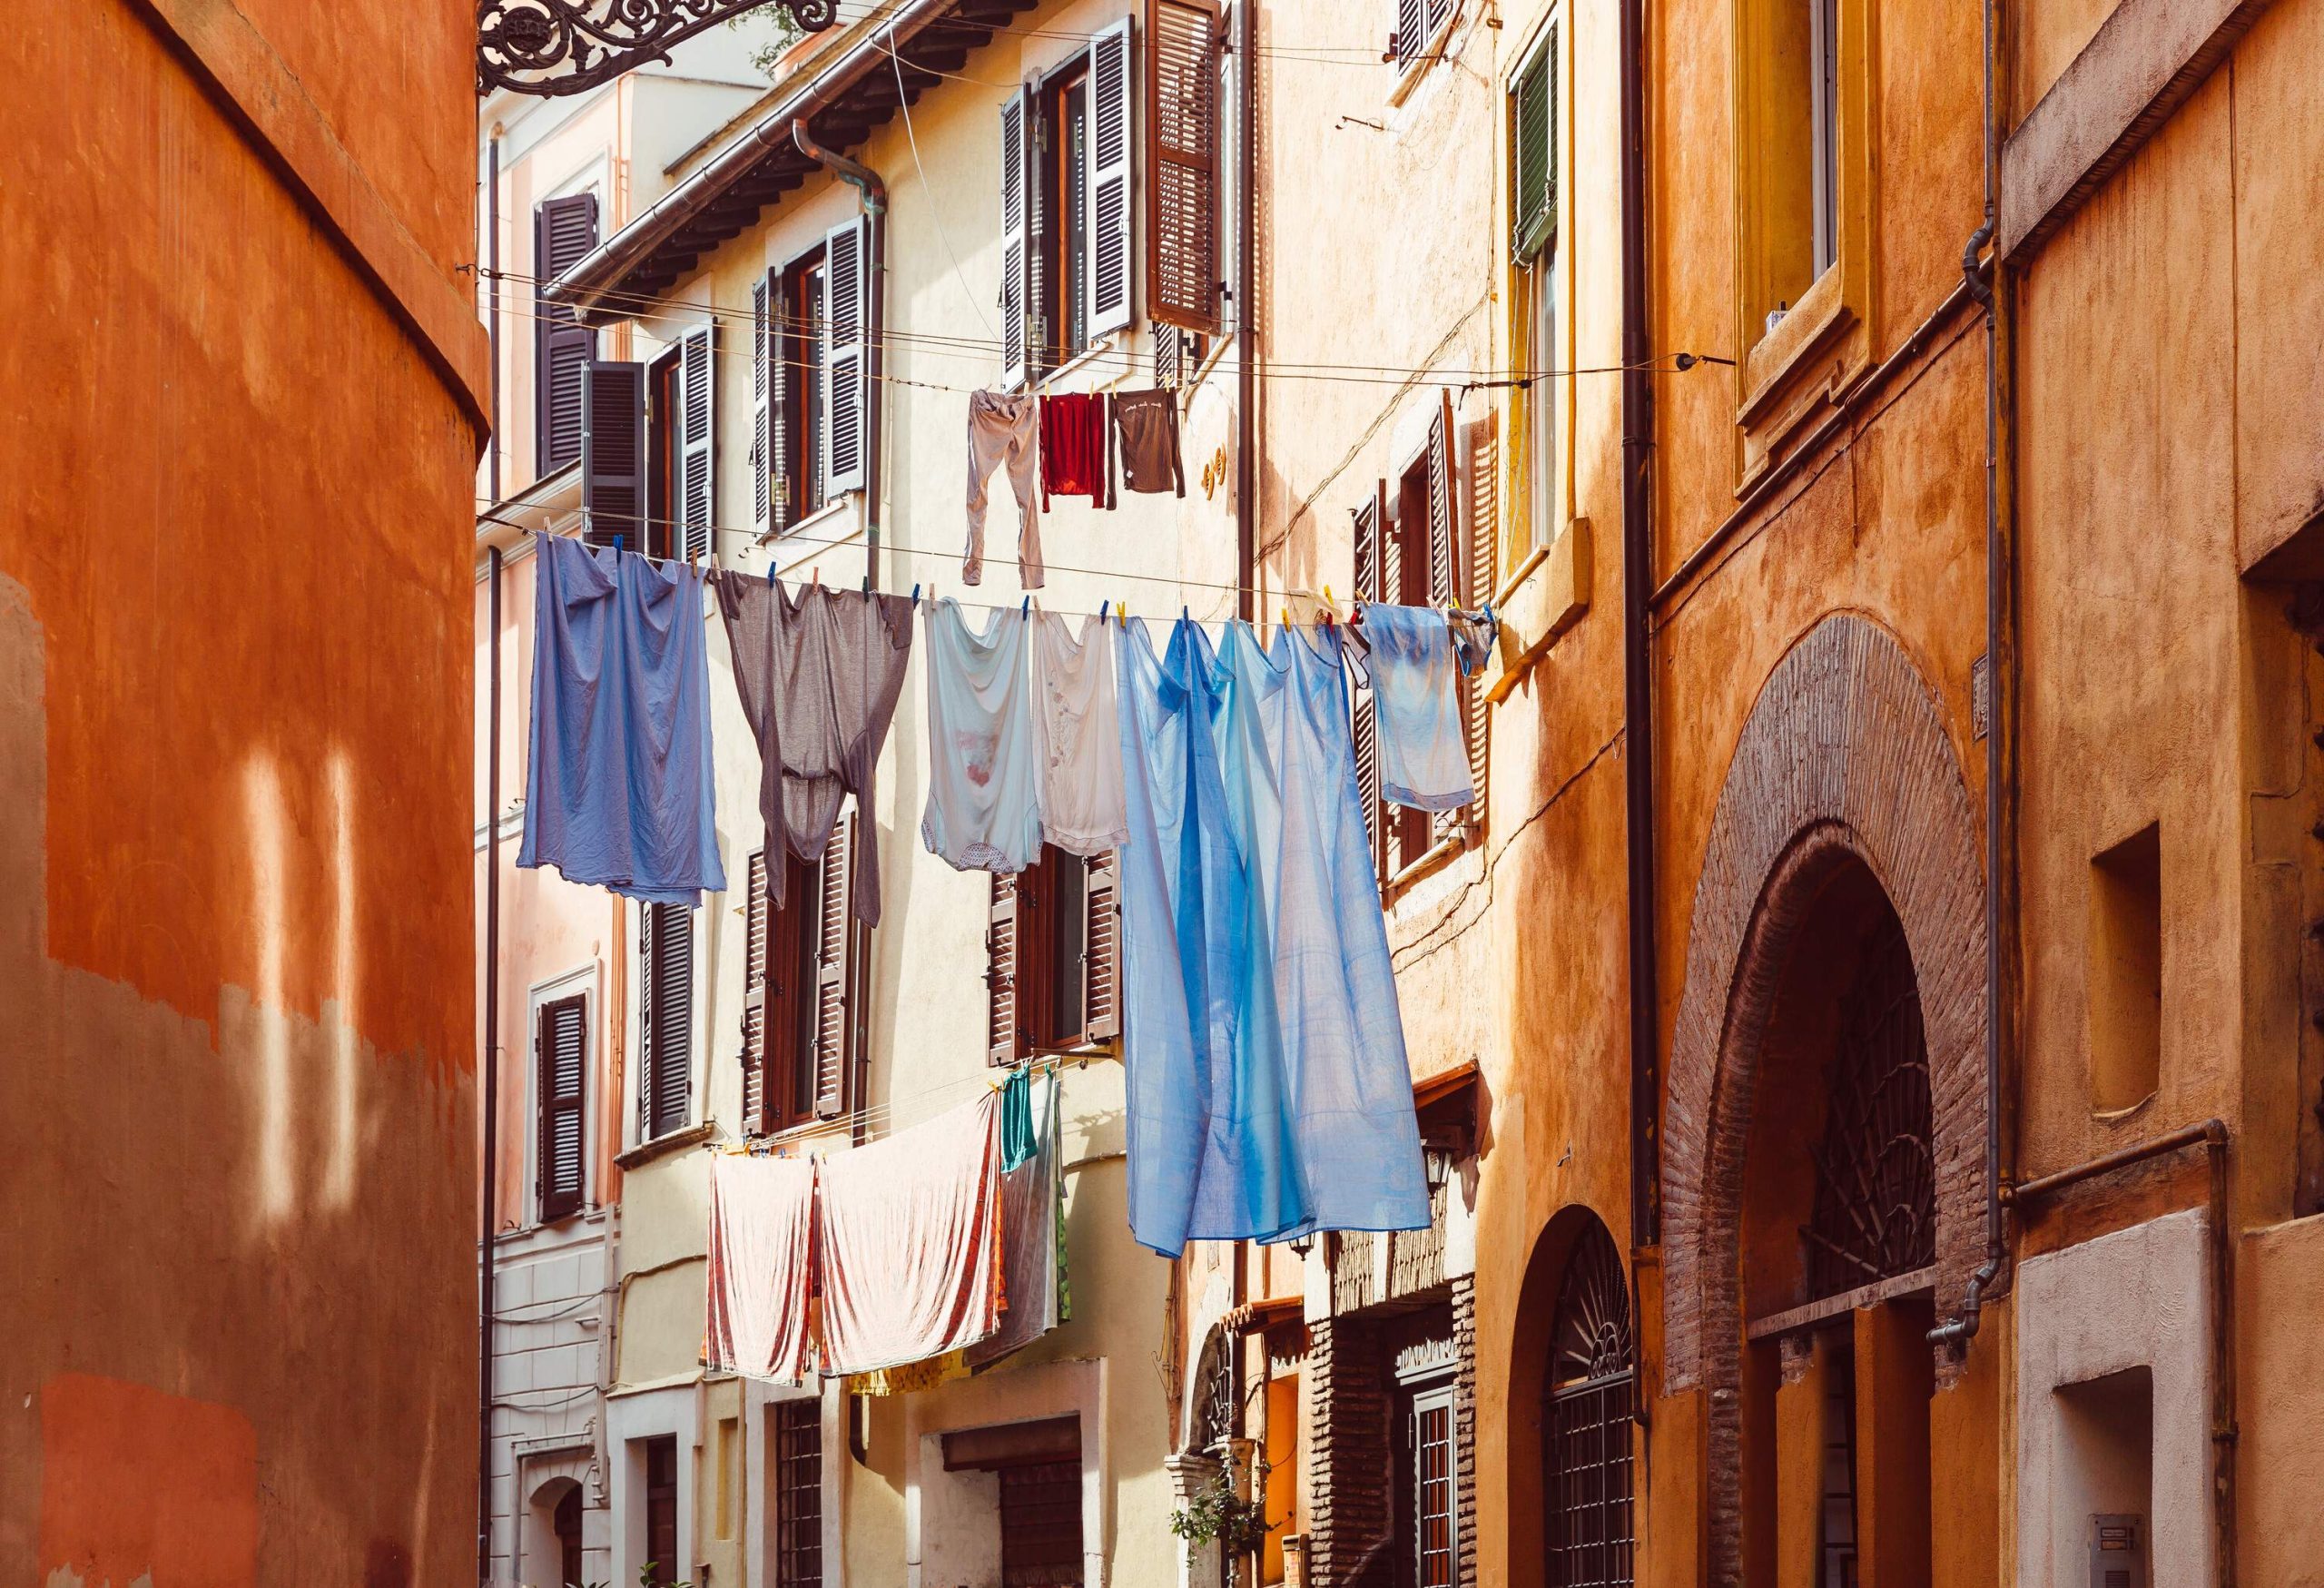 Household linens and clothes hanging out to dry across the street.